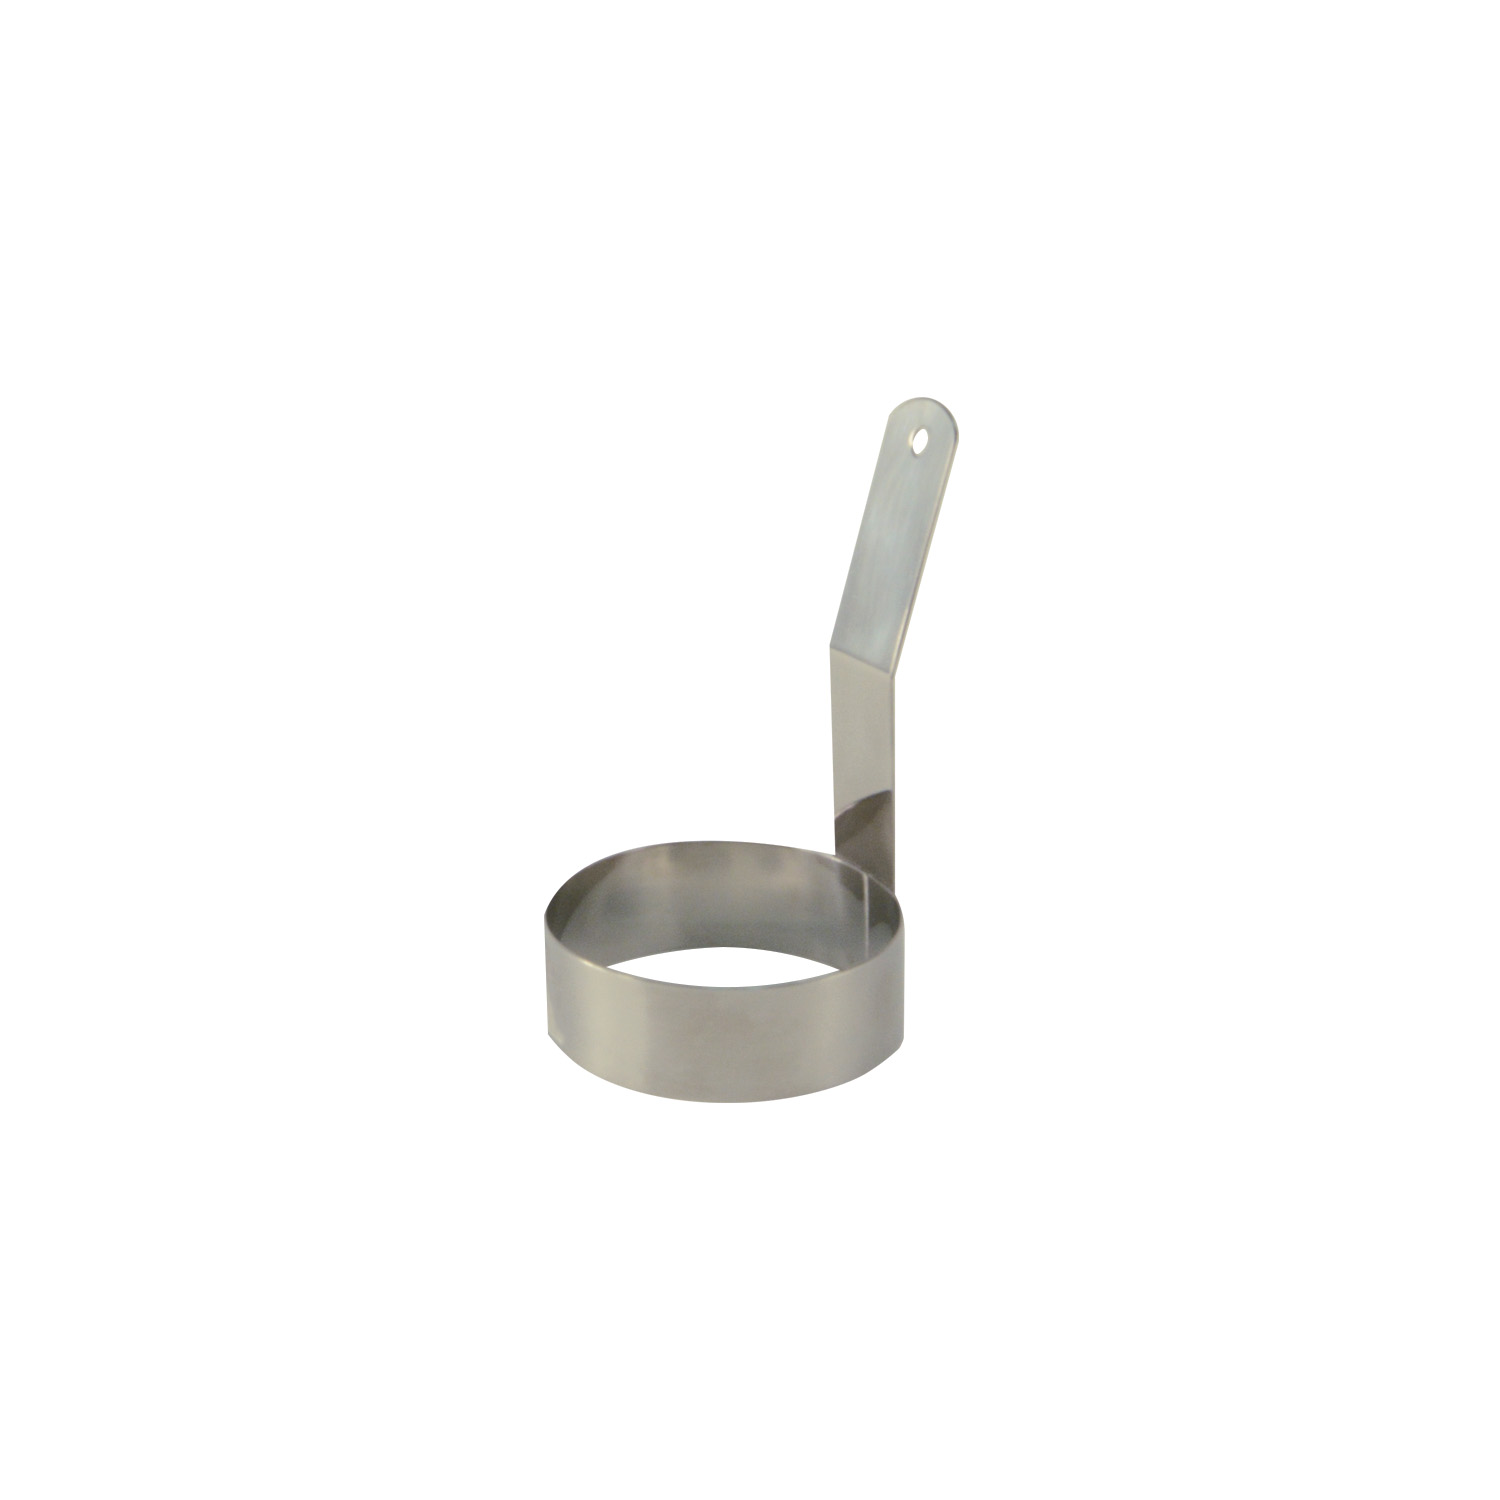 CAC China SEGR-3 Stainless Steel Egg Ring 3" Dia